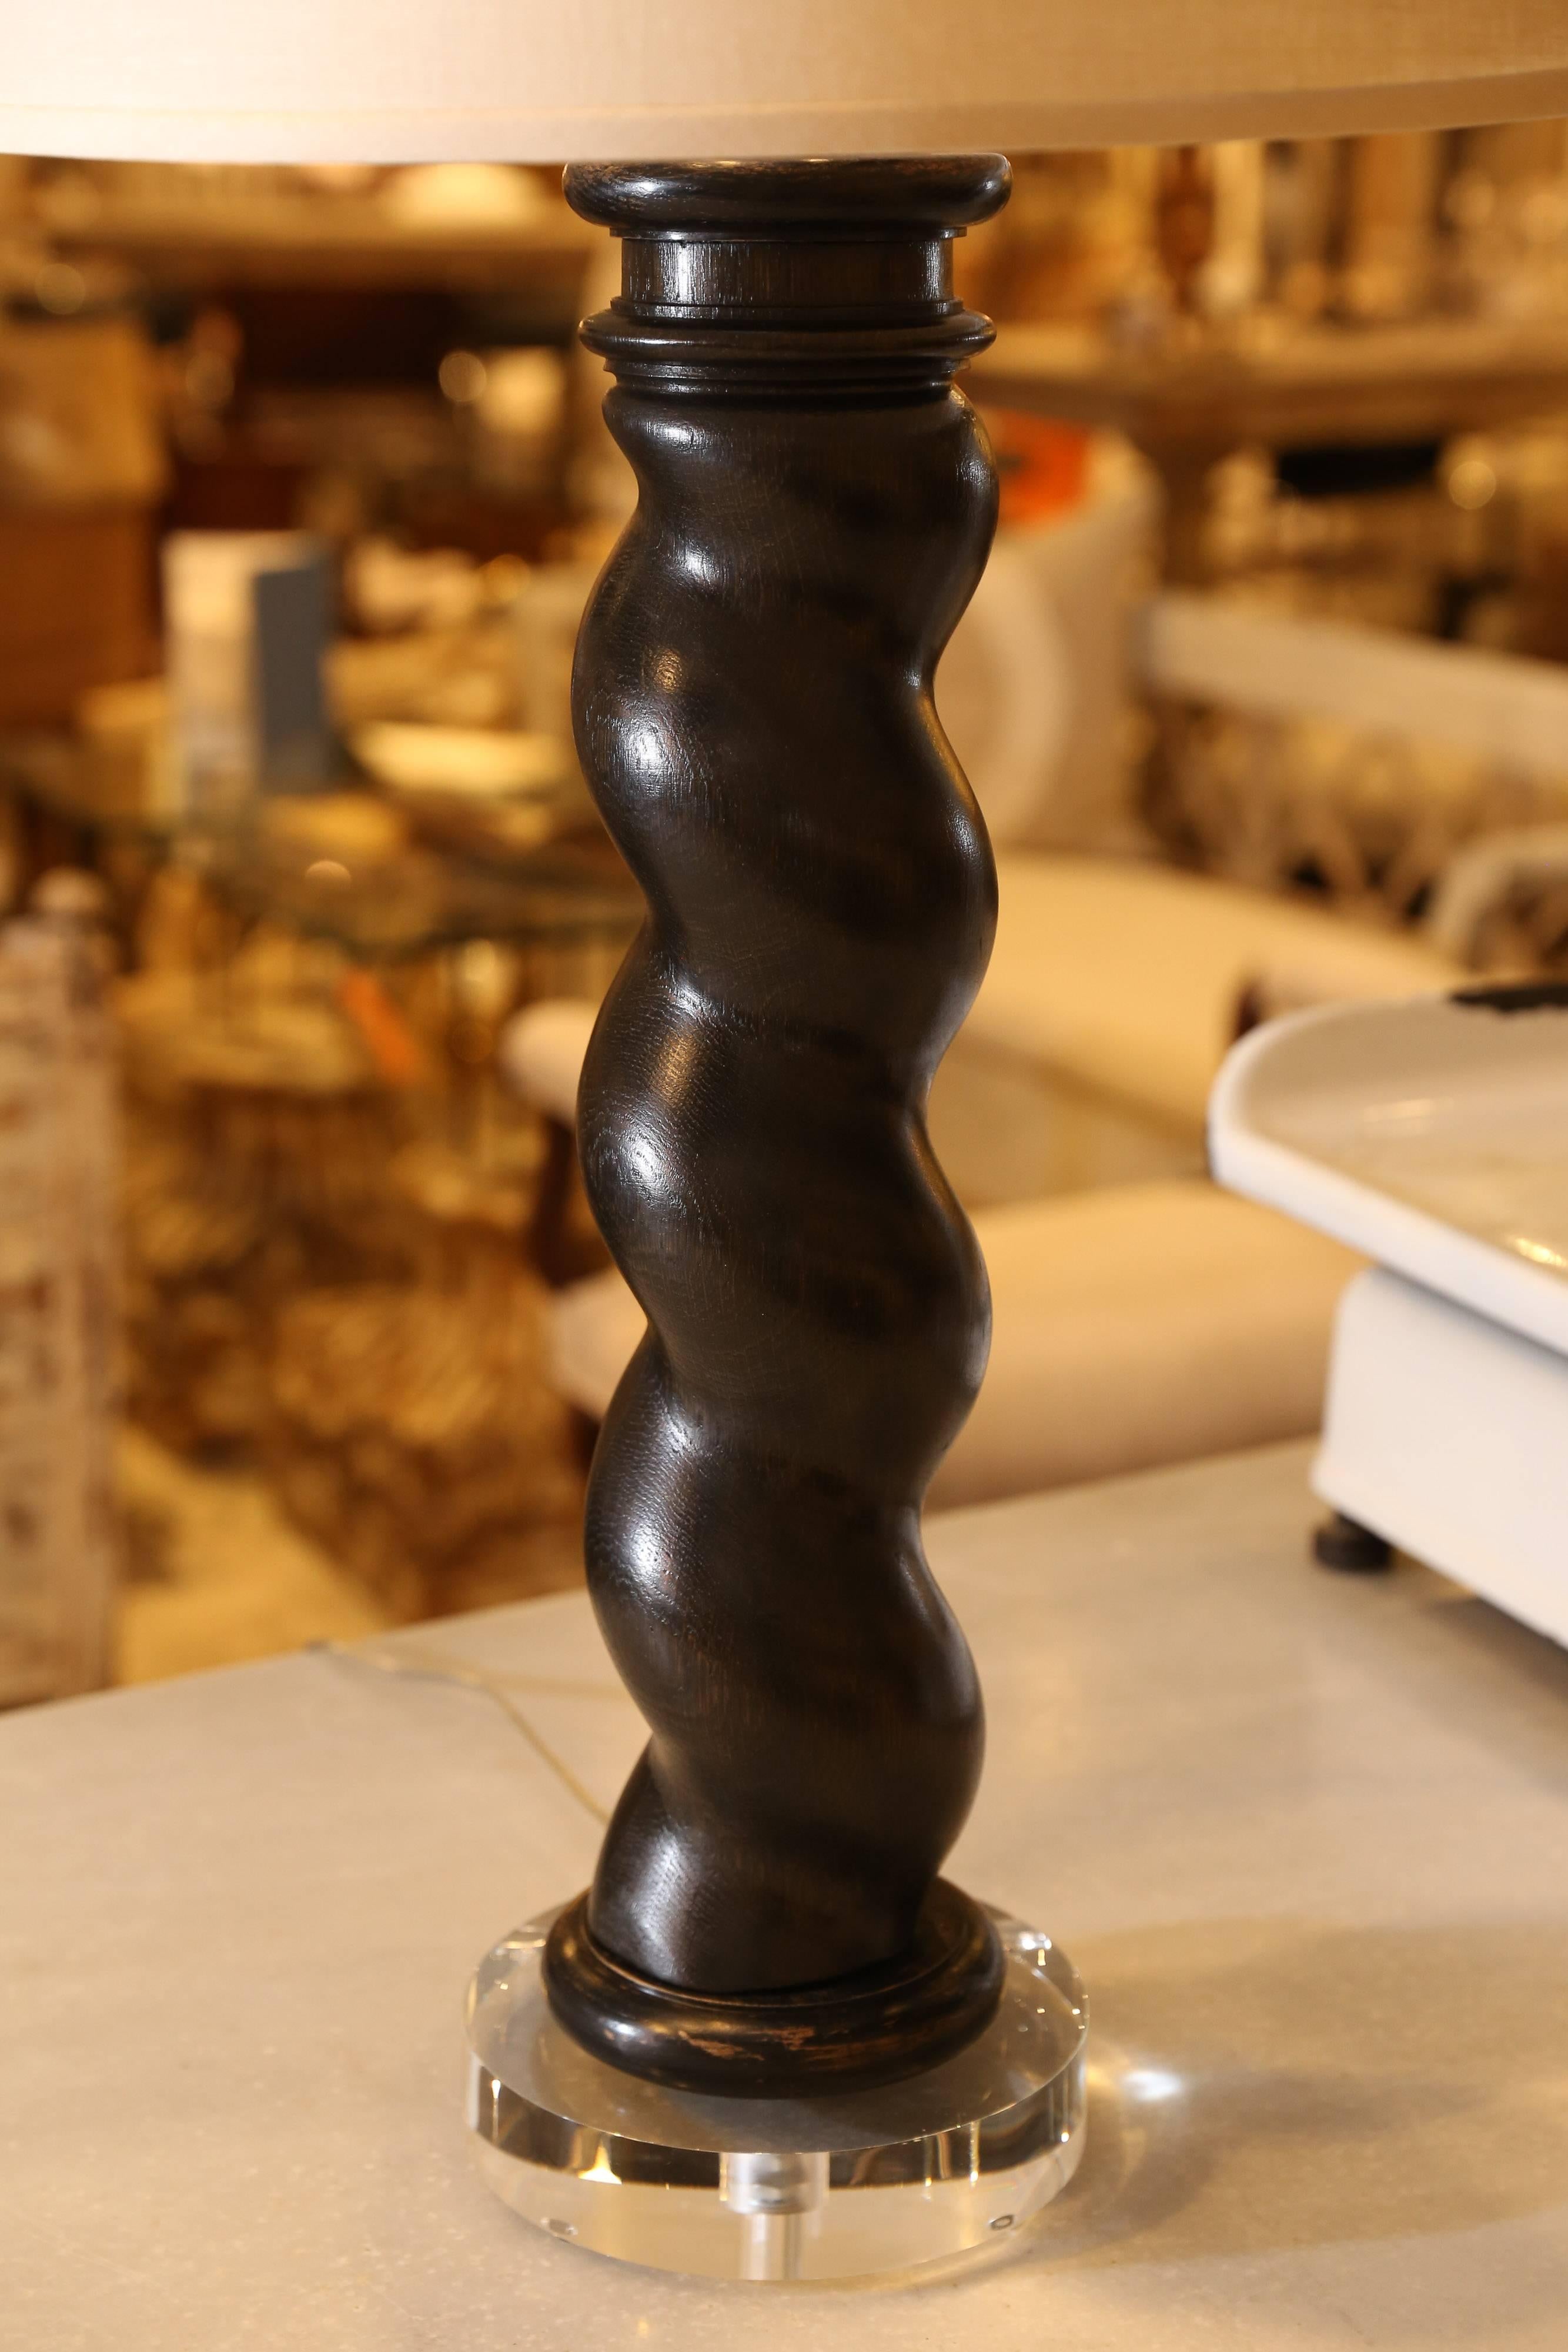 A marvelous old column from France reborn as an exceptional table lamp. The beautifully turned dark hardwood column has a tactile quality that almost insists that it be touched. Seated on an acrylic base with a 17 inch white shade, this makes a